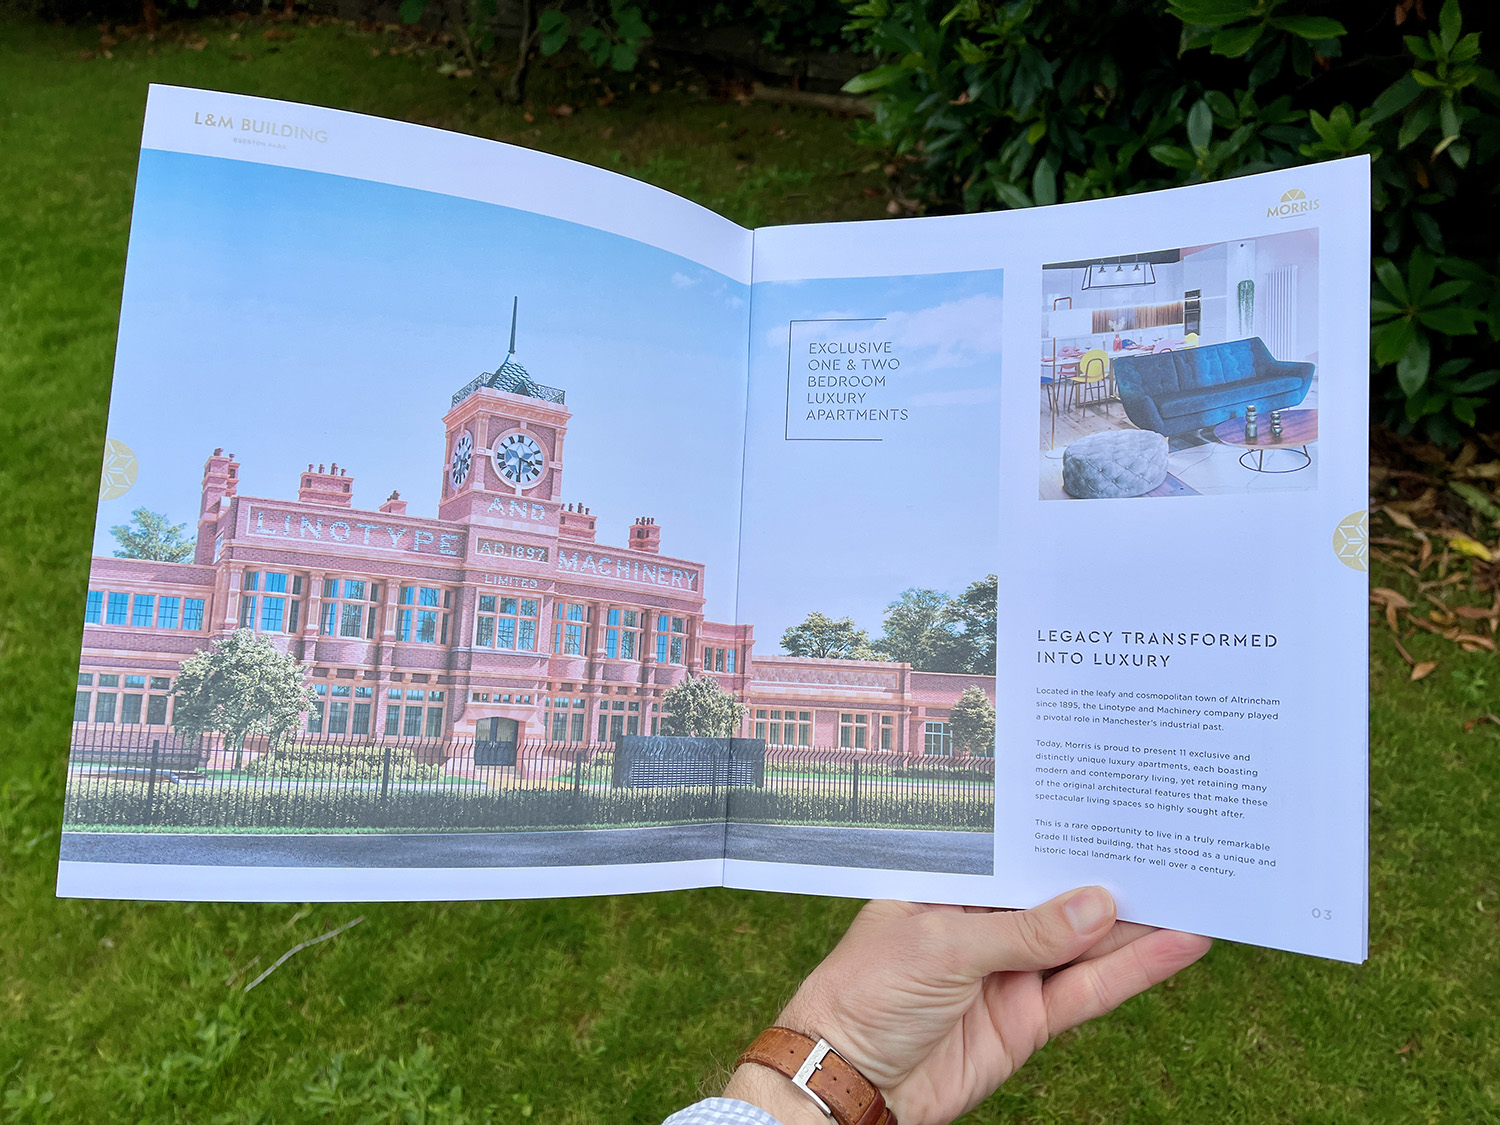 The brochure makes great use of the beautiful façade and windows full of light in the building.